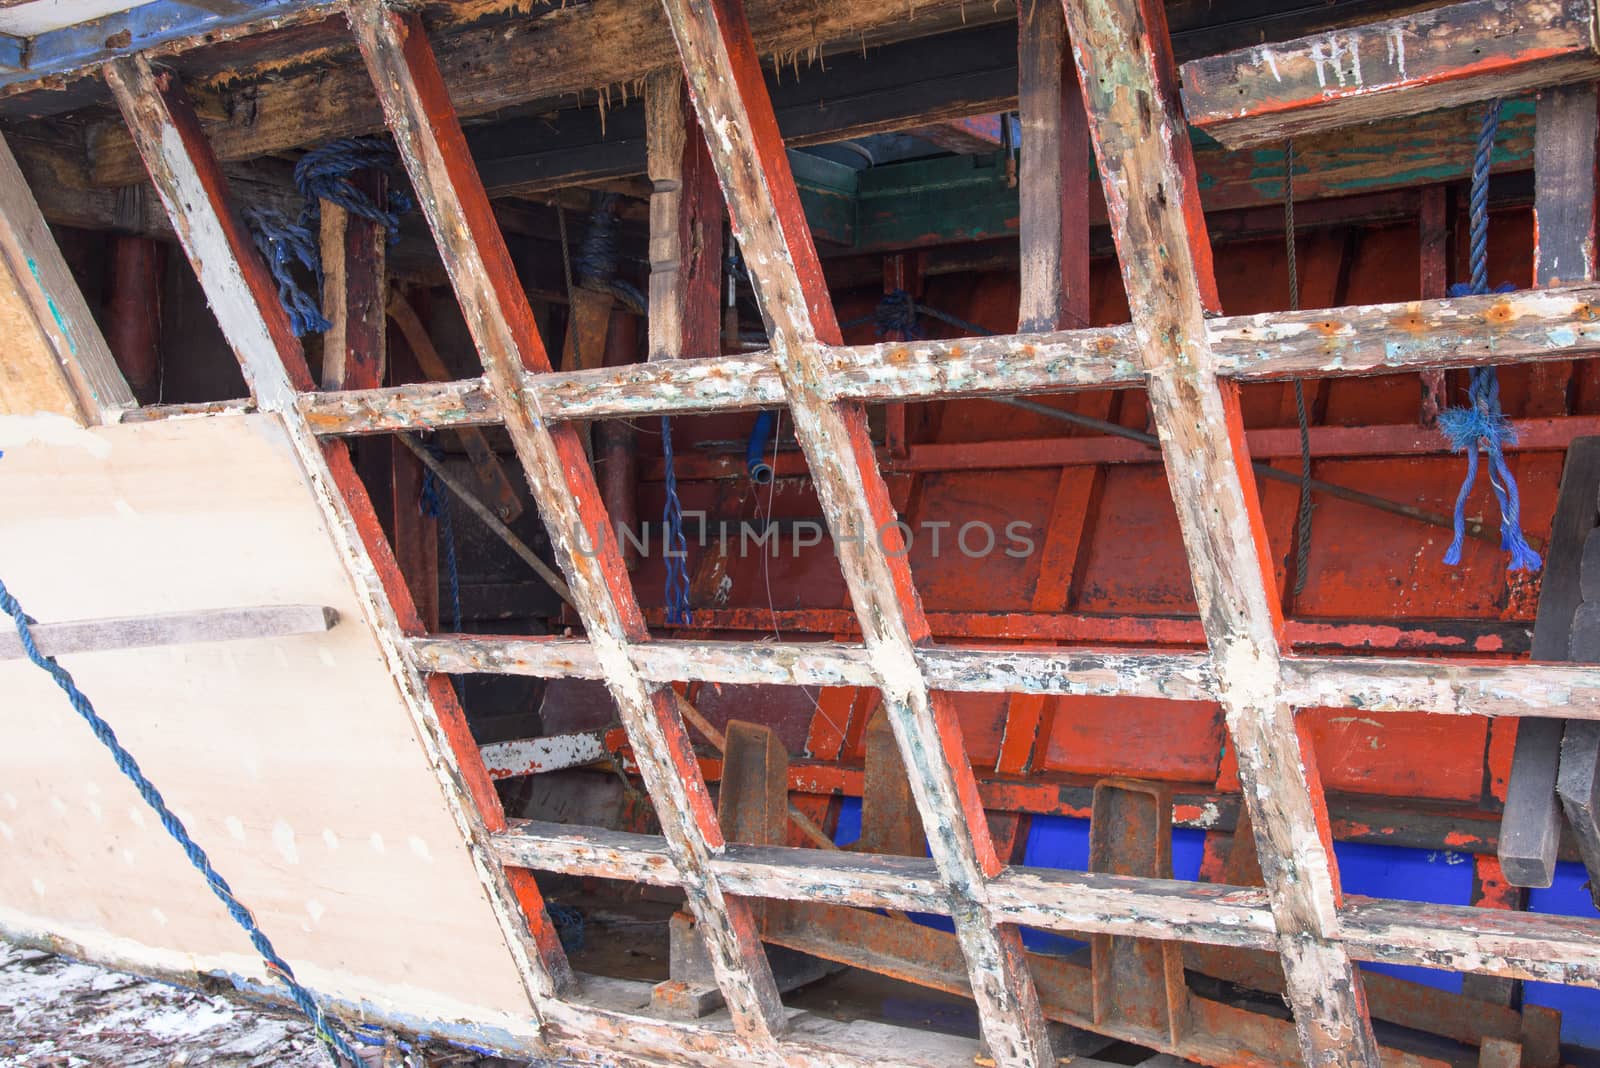 Filipino fishing vessel being repaired with marine plywood at a shipyard in The Philippines.